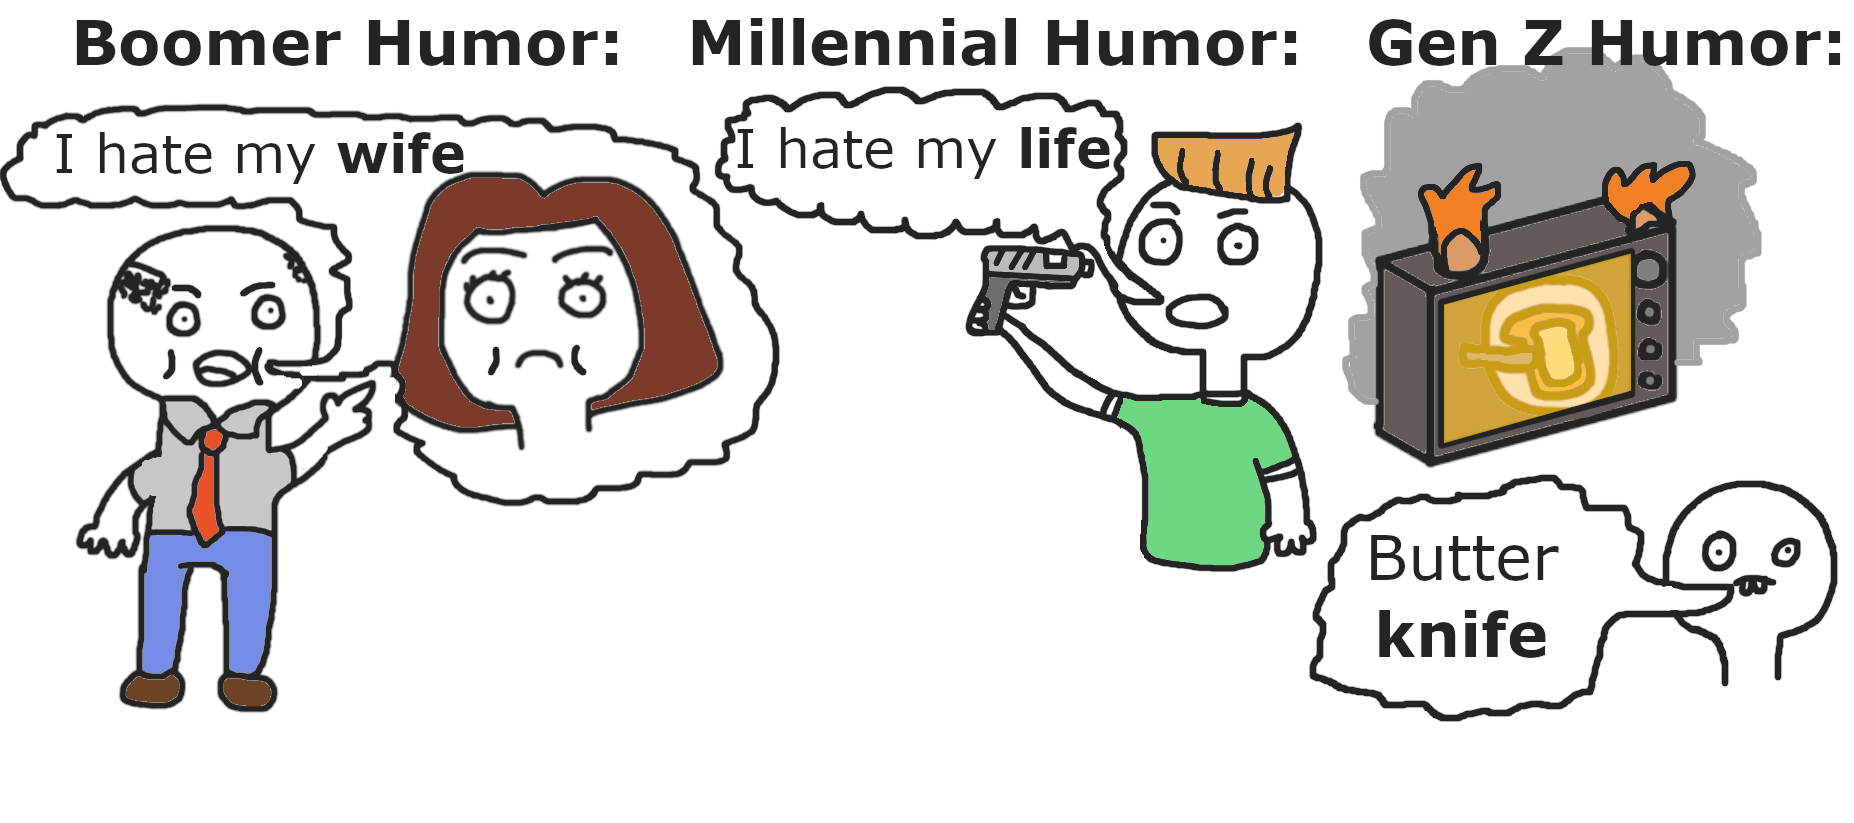 ./images/humor-over-generations.png